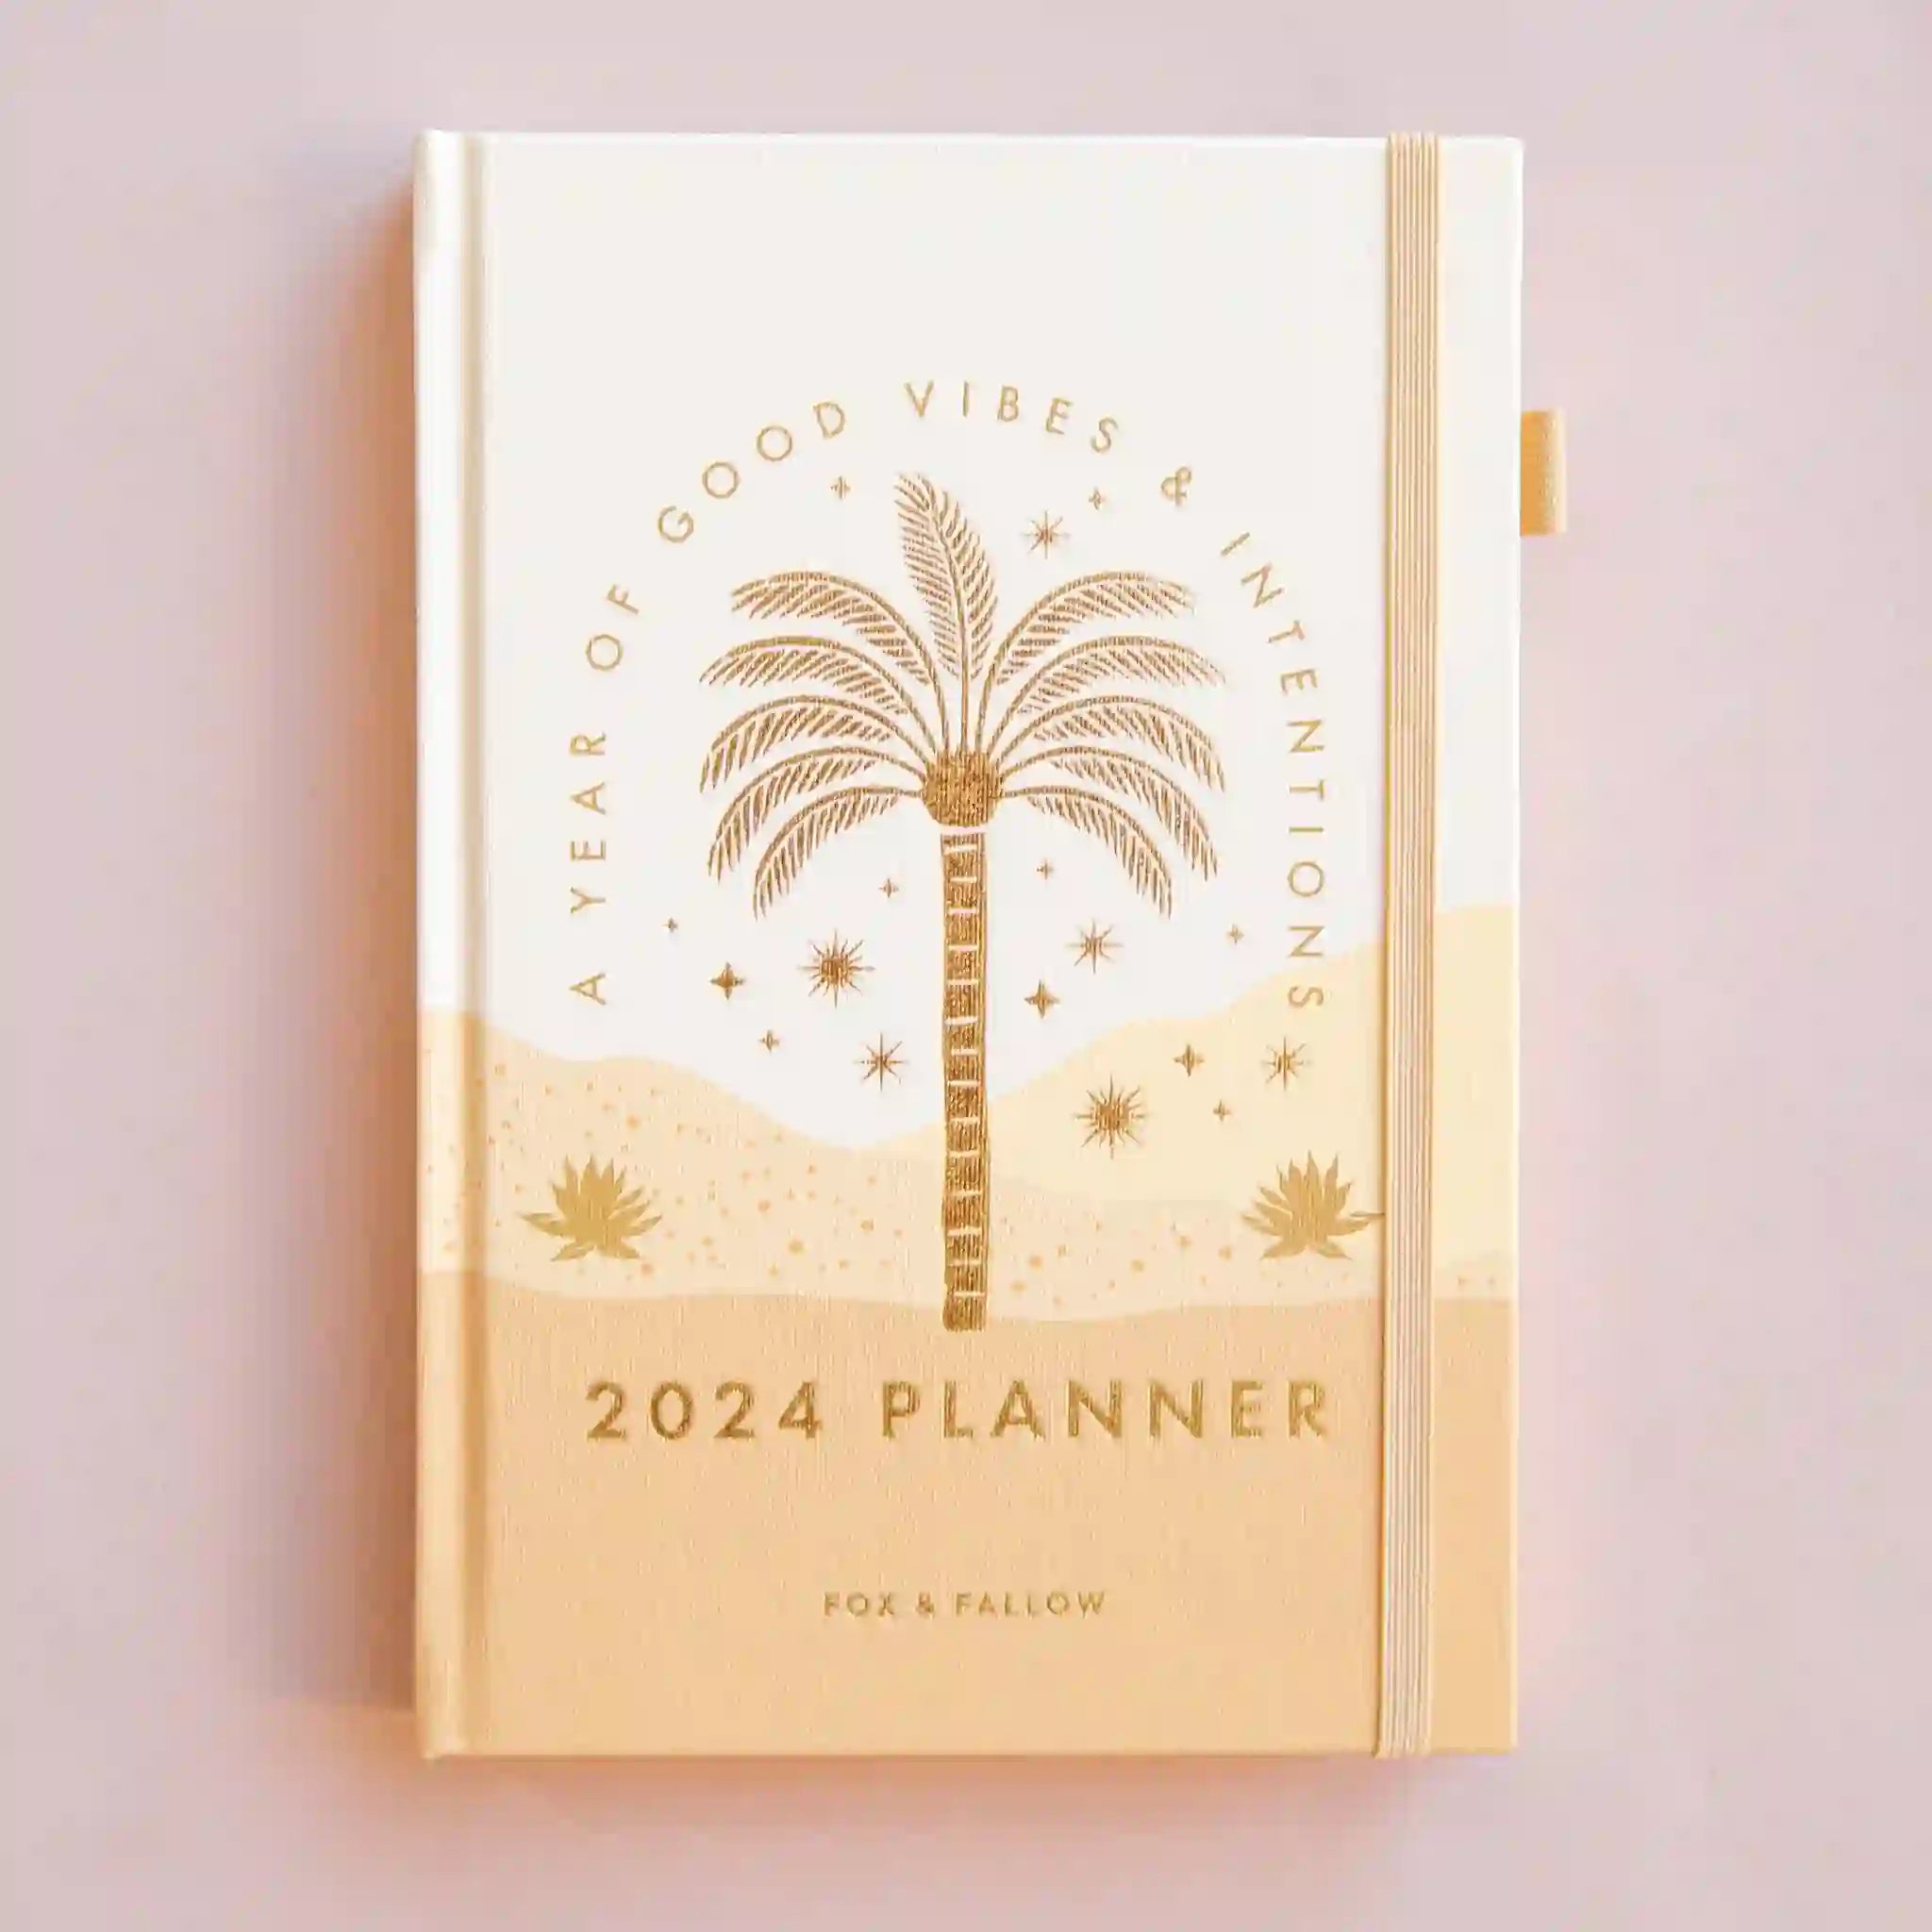 On a pink background is a tan planner with gold foiled "2024 Planner" text in the center as well as arched text over a palm tree design that reads, "A Year Of Good Vibes & Intentions" and a light pink elastic loop for keeping shut.